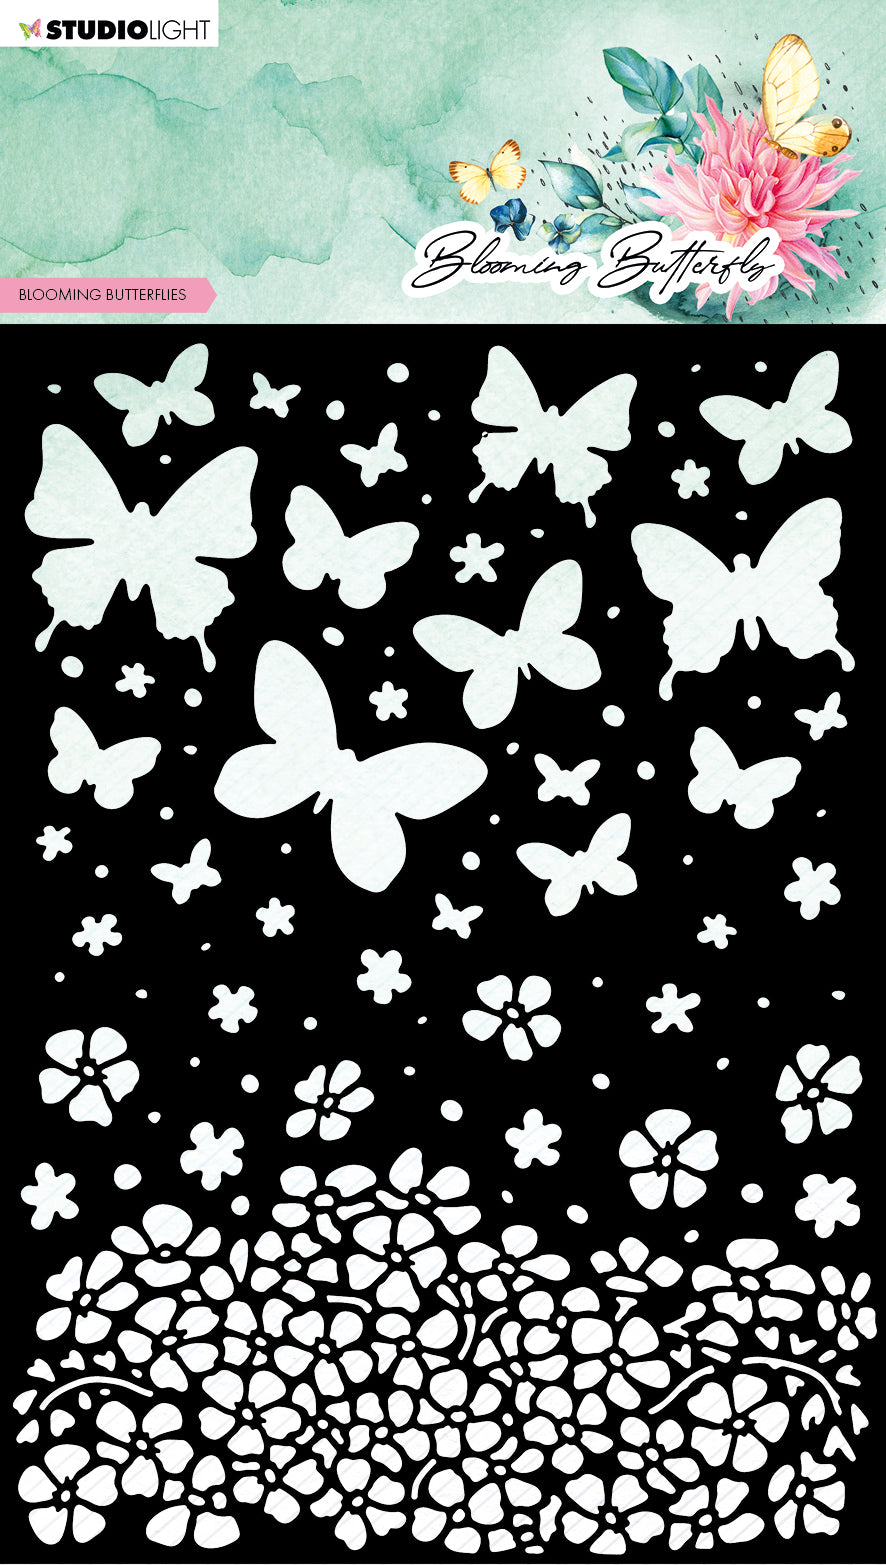 SL Mask Blooming Butterflies Blooming Butterfly 150x210x1mm 1 PC nr.169